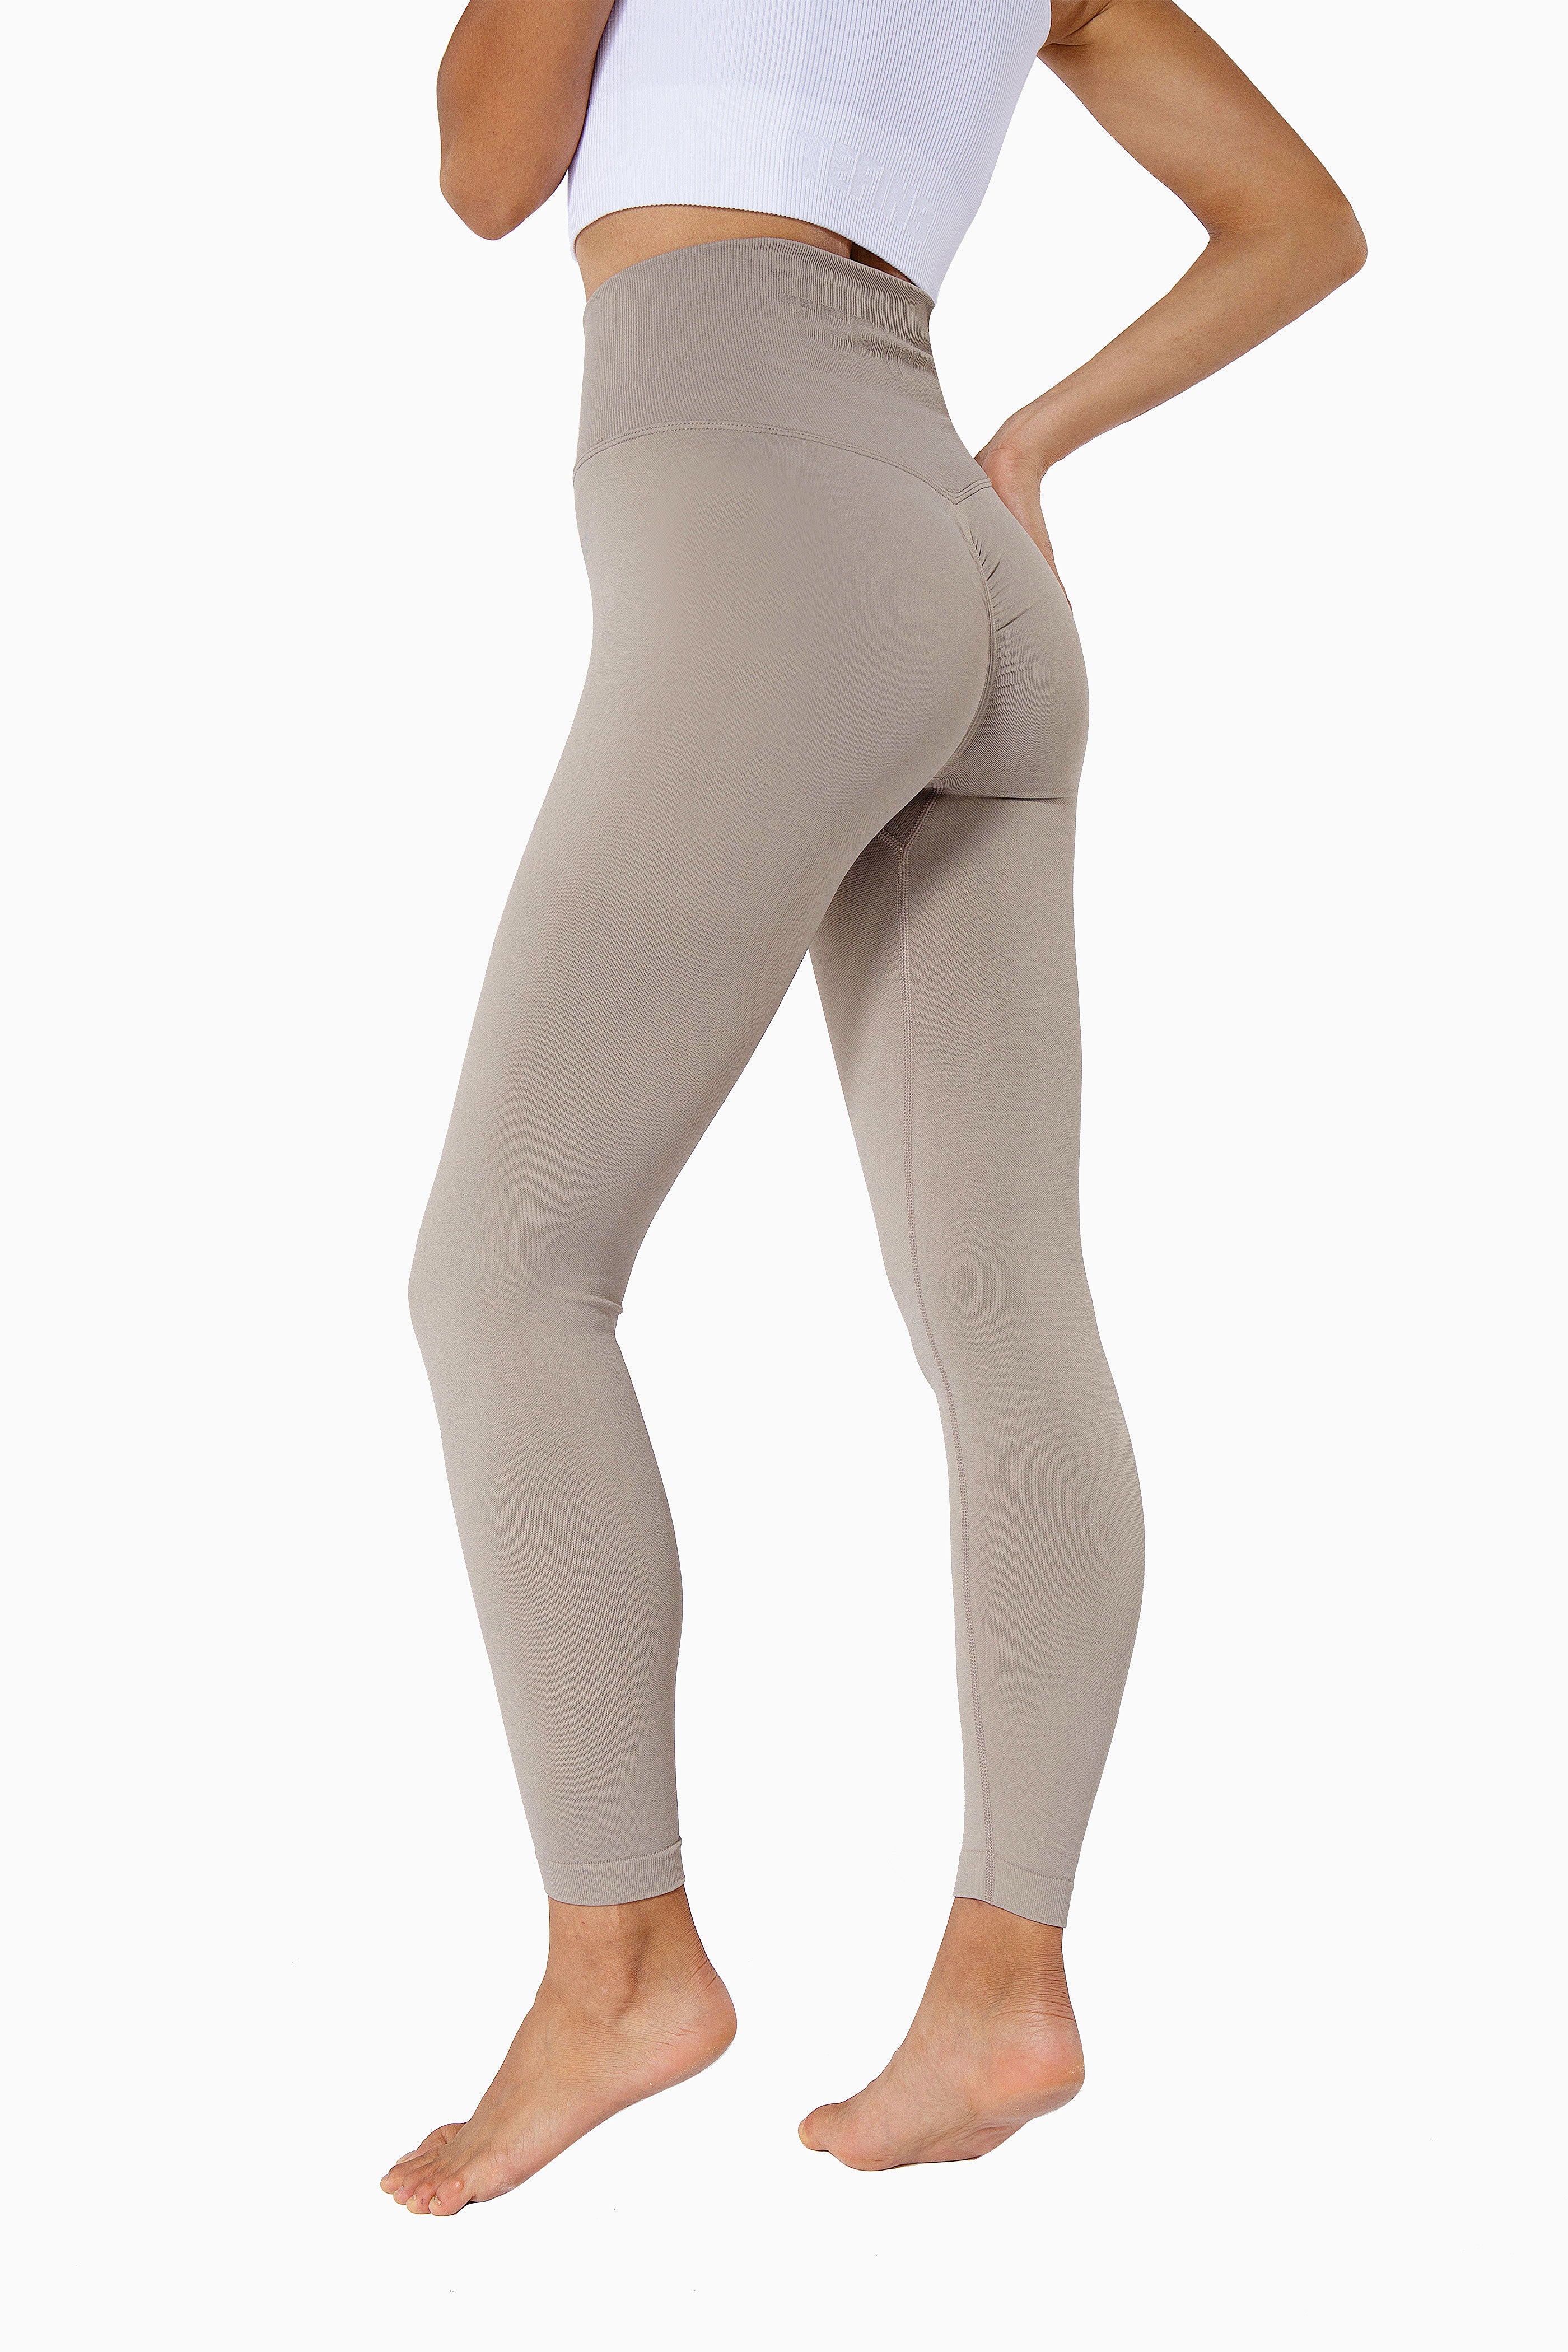 Shop High Waisted Leggings - Made in Canada and US – tagged Tie